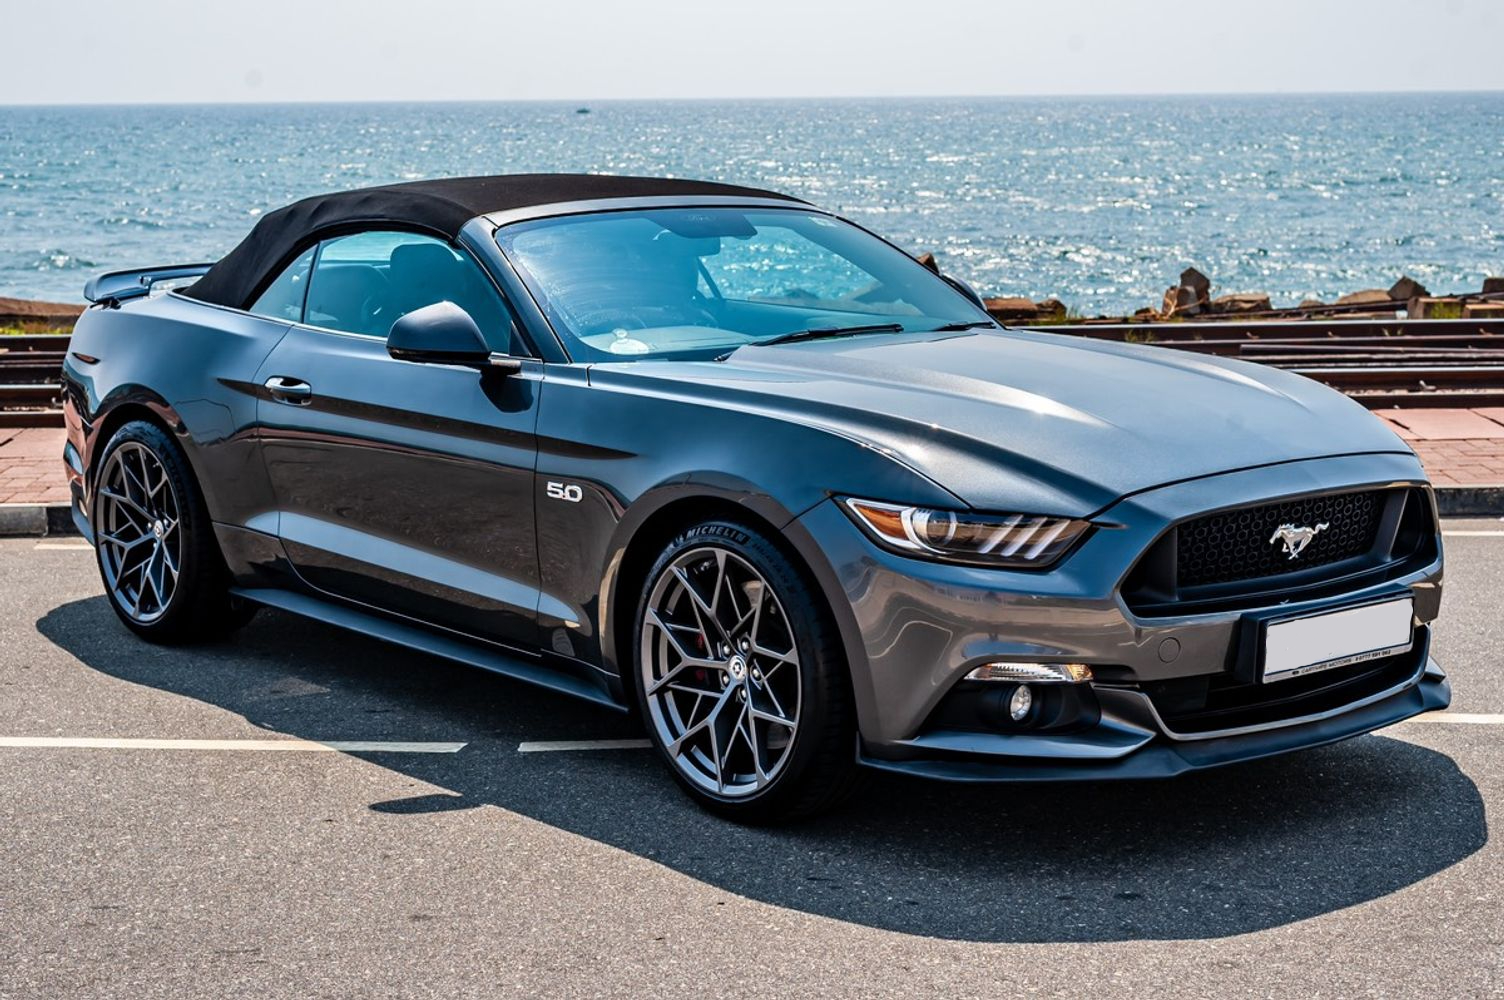 Ford Mustang GT Convertible 2016 Review